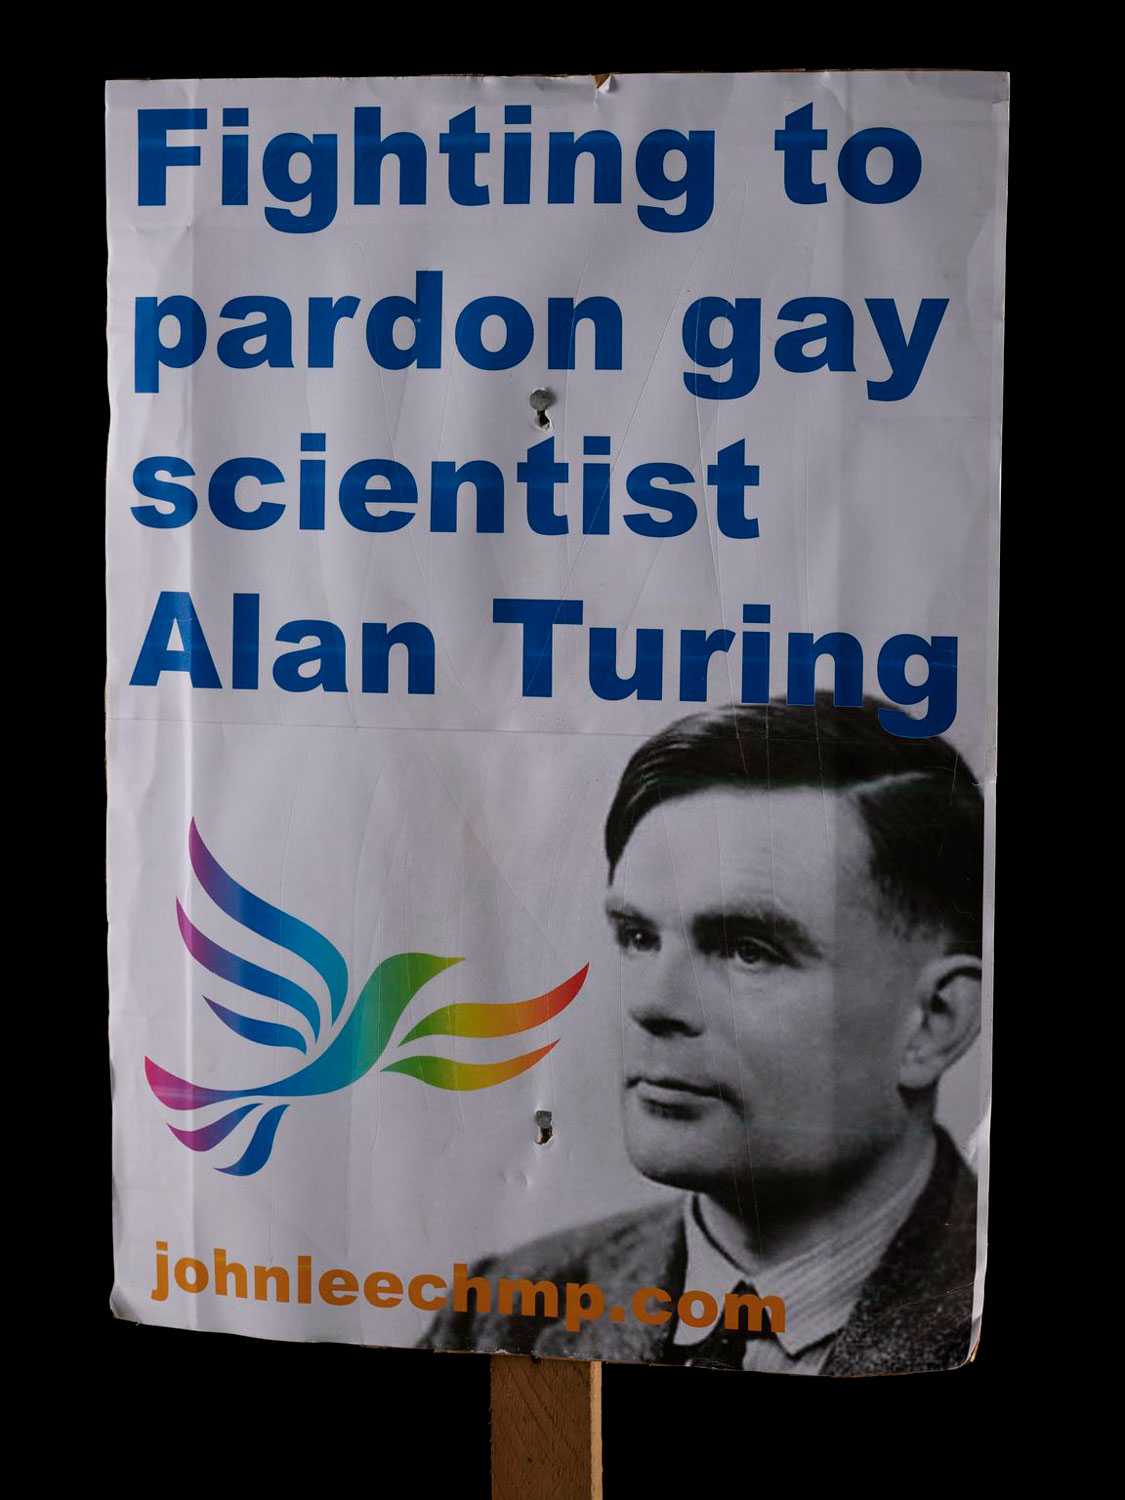 A placard with a picture of Alan Turing and a demand for his pardon written on it.